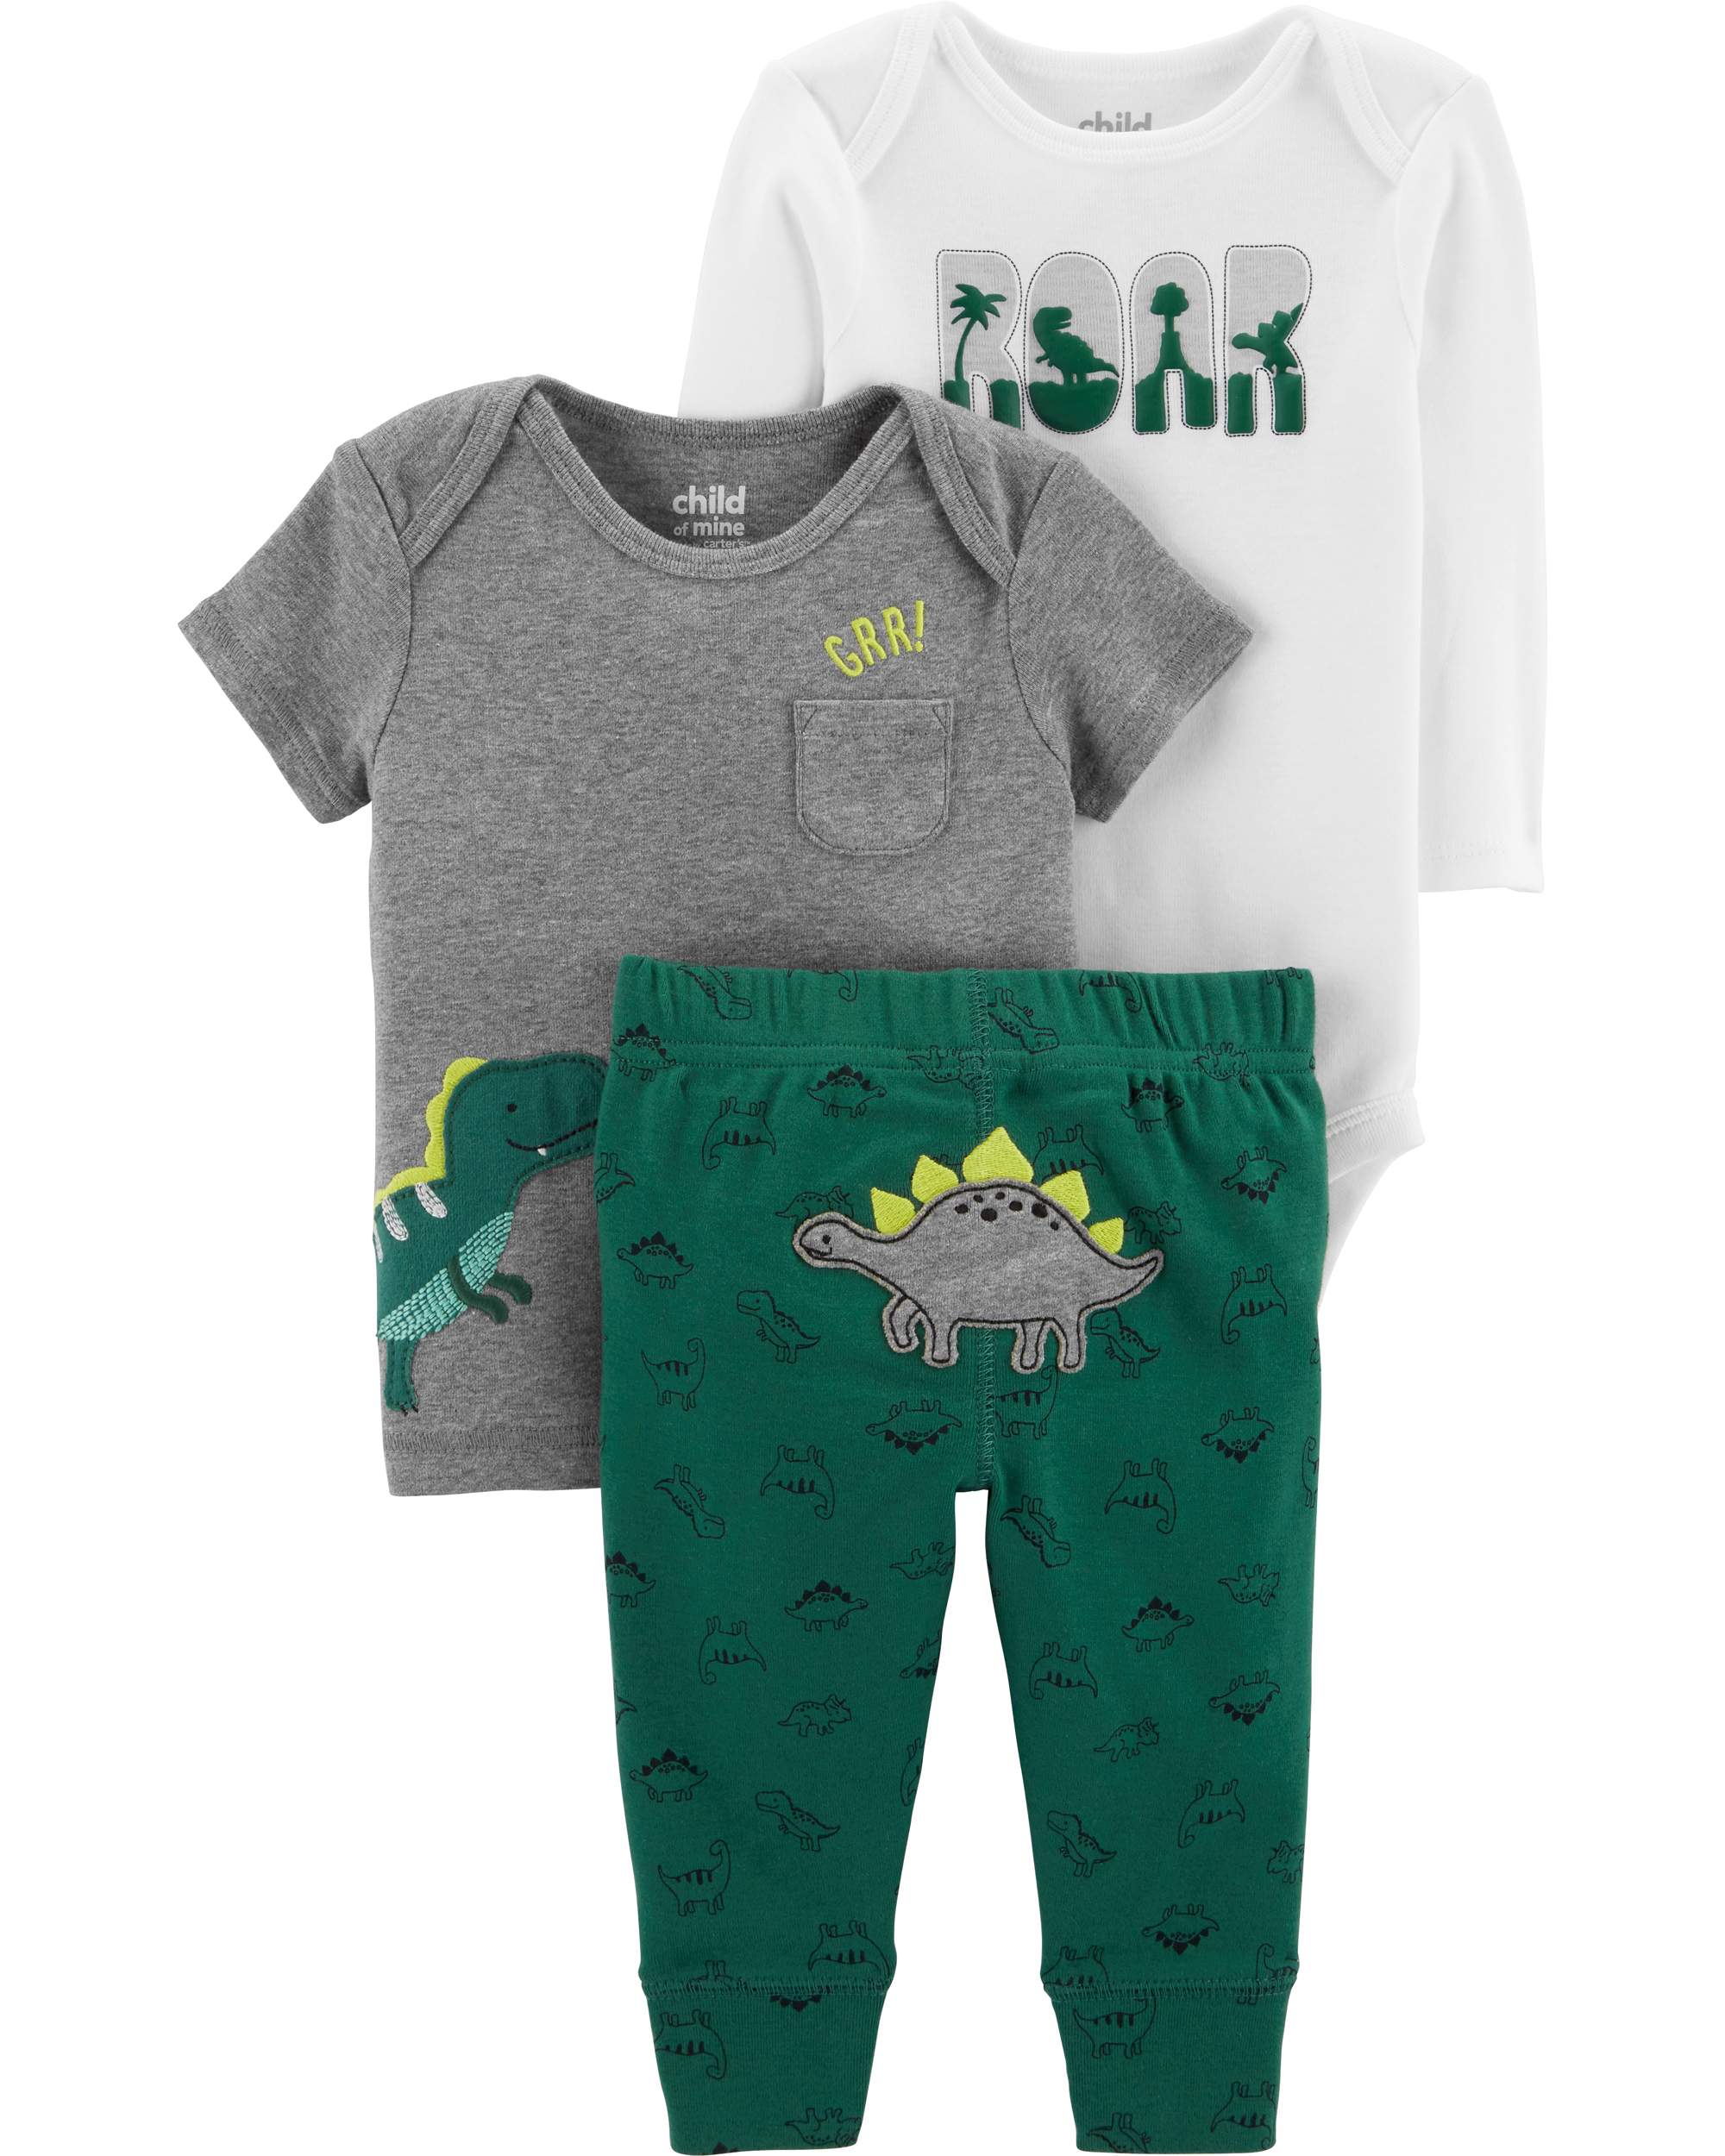 Child of Mine by Carter's Baby Boy Outfit Long Sleeve Bodysuit, T-Shirt & Pants, 3-Piece - image 1 of 1